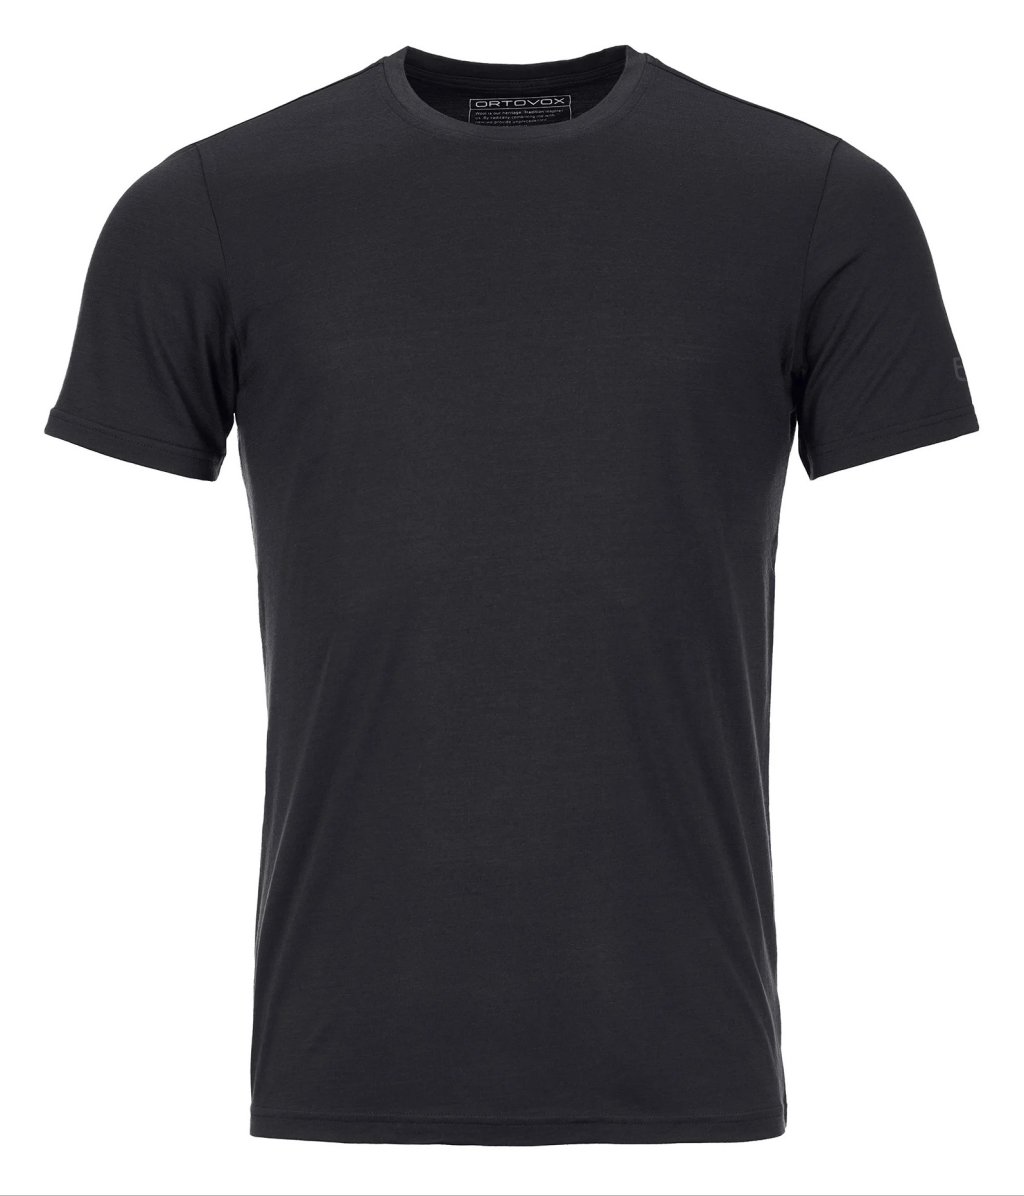 Simple merino T-shirt from Ortovox. The "Ortovox Wool Promise" guarantees, among other things, production without mulesing.